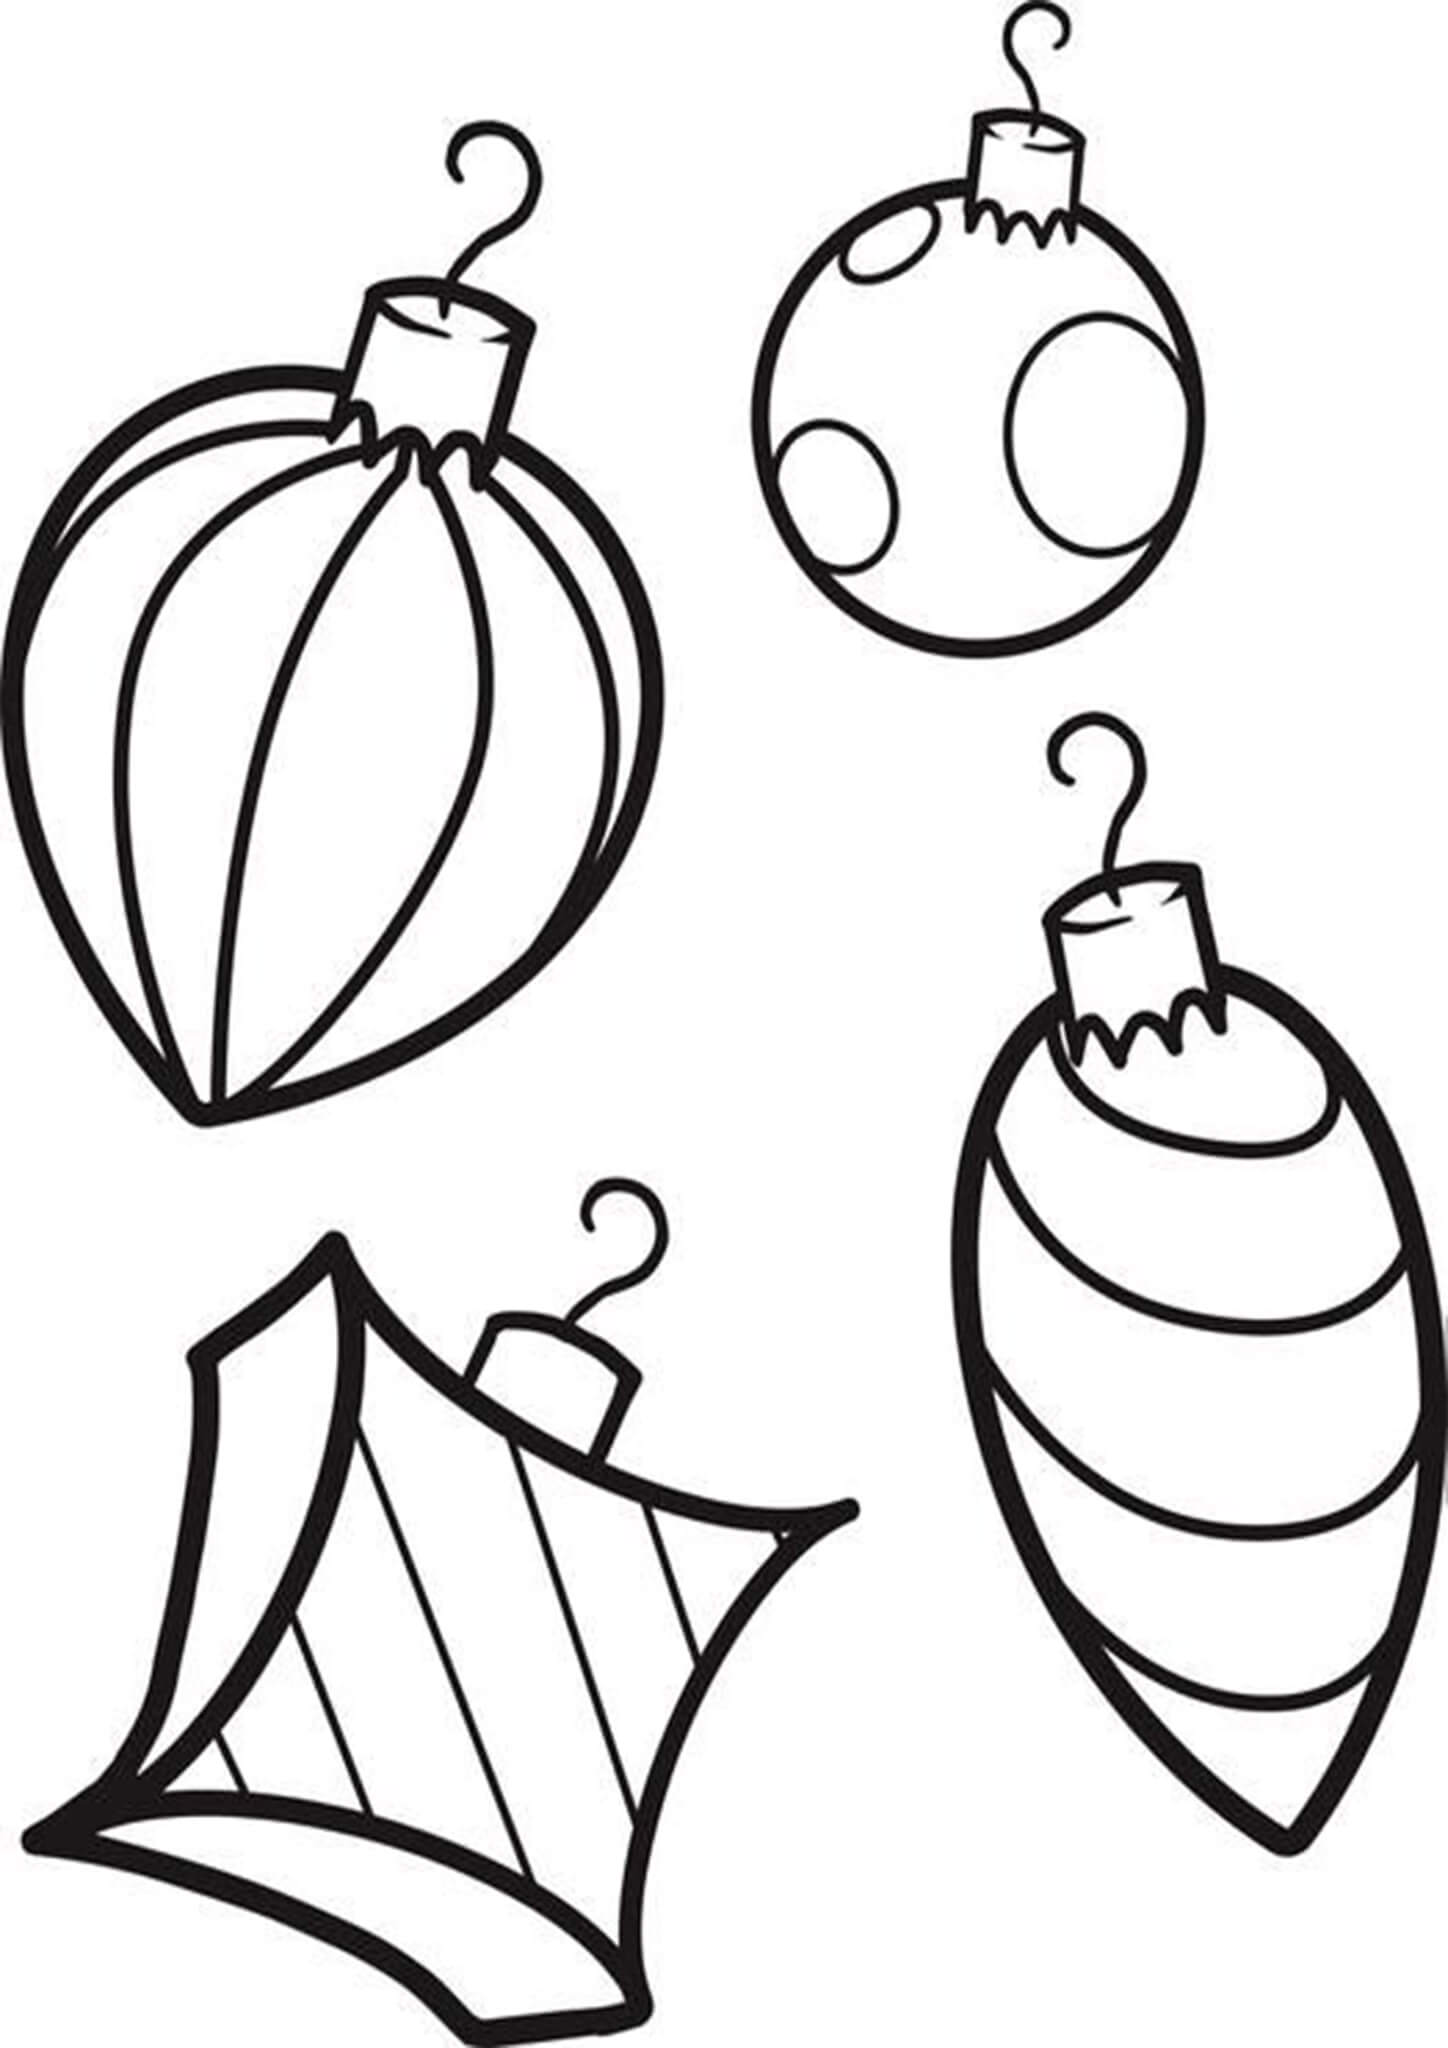 Christmas Ornament Coloring Pages Tulamama